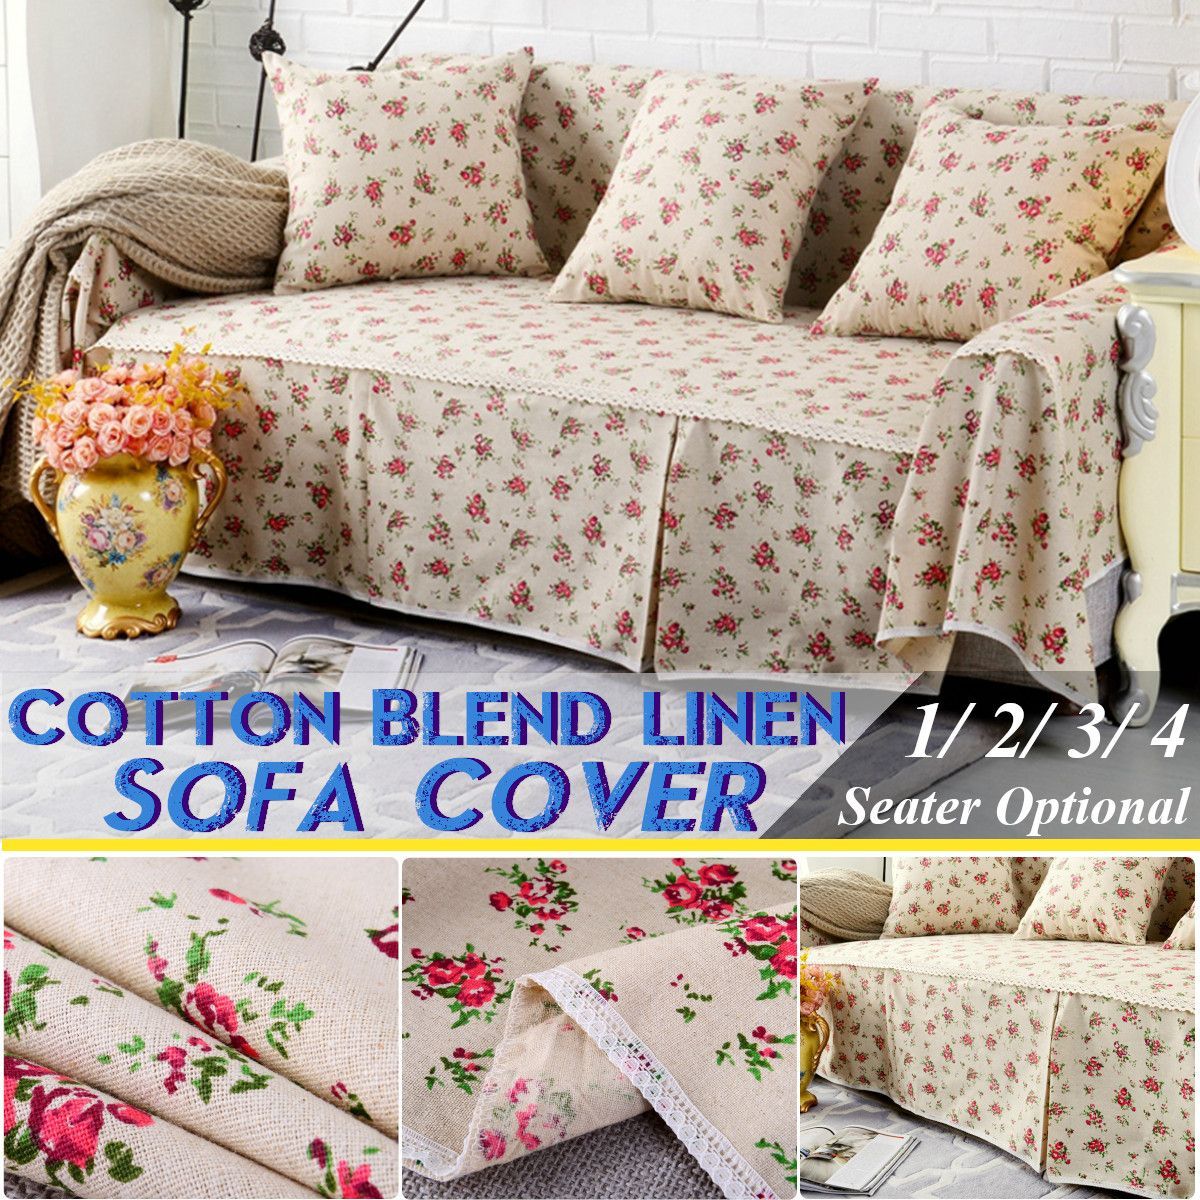 Sofa-Seat-Covers-Couch-Slipcover-Seat-Cotton-Blend-1-4-Seater-Pet-Dog-Sofa-Cover-Protector-1454798